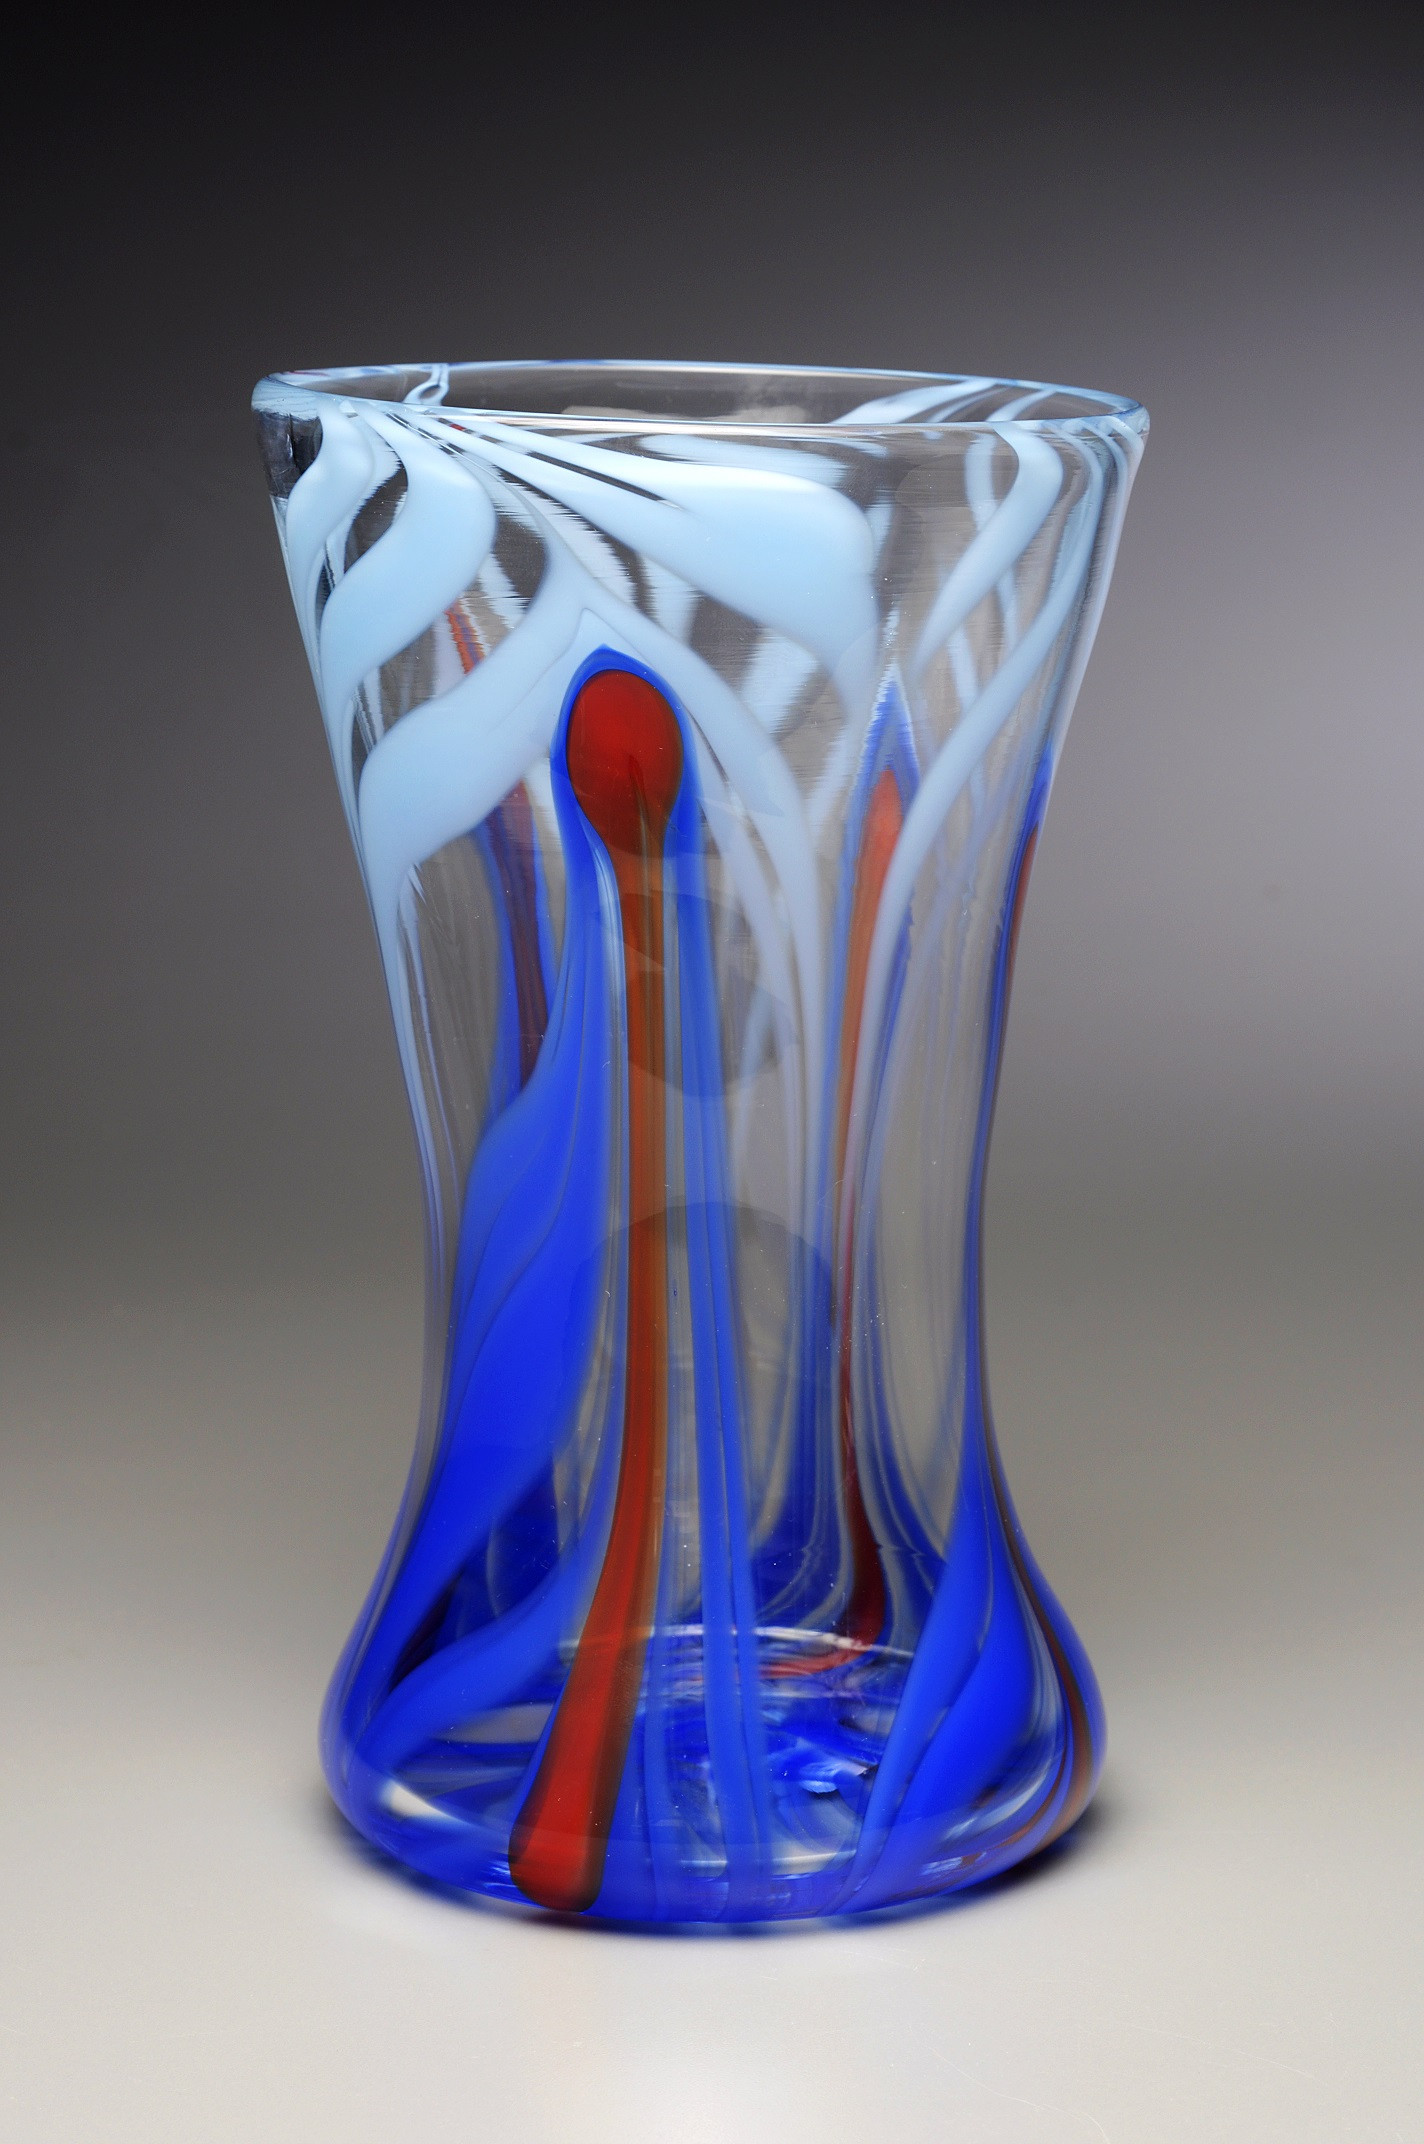 hull art usa vase of cac submissions creative arts workshop in flared vase glass 7″ x 7″